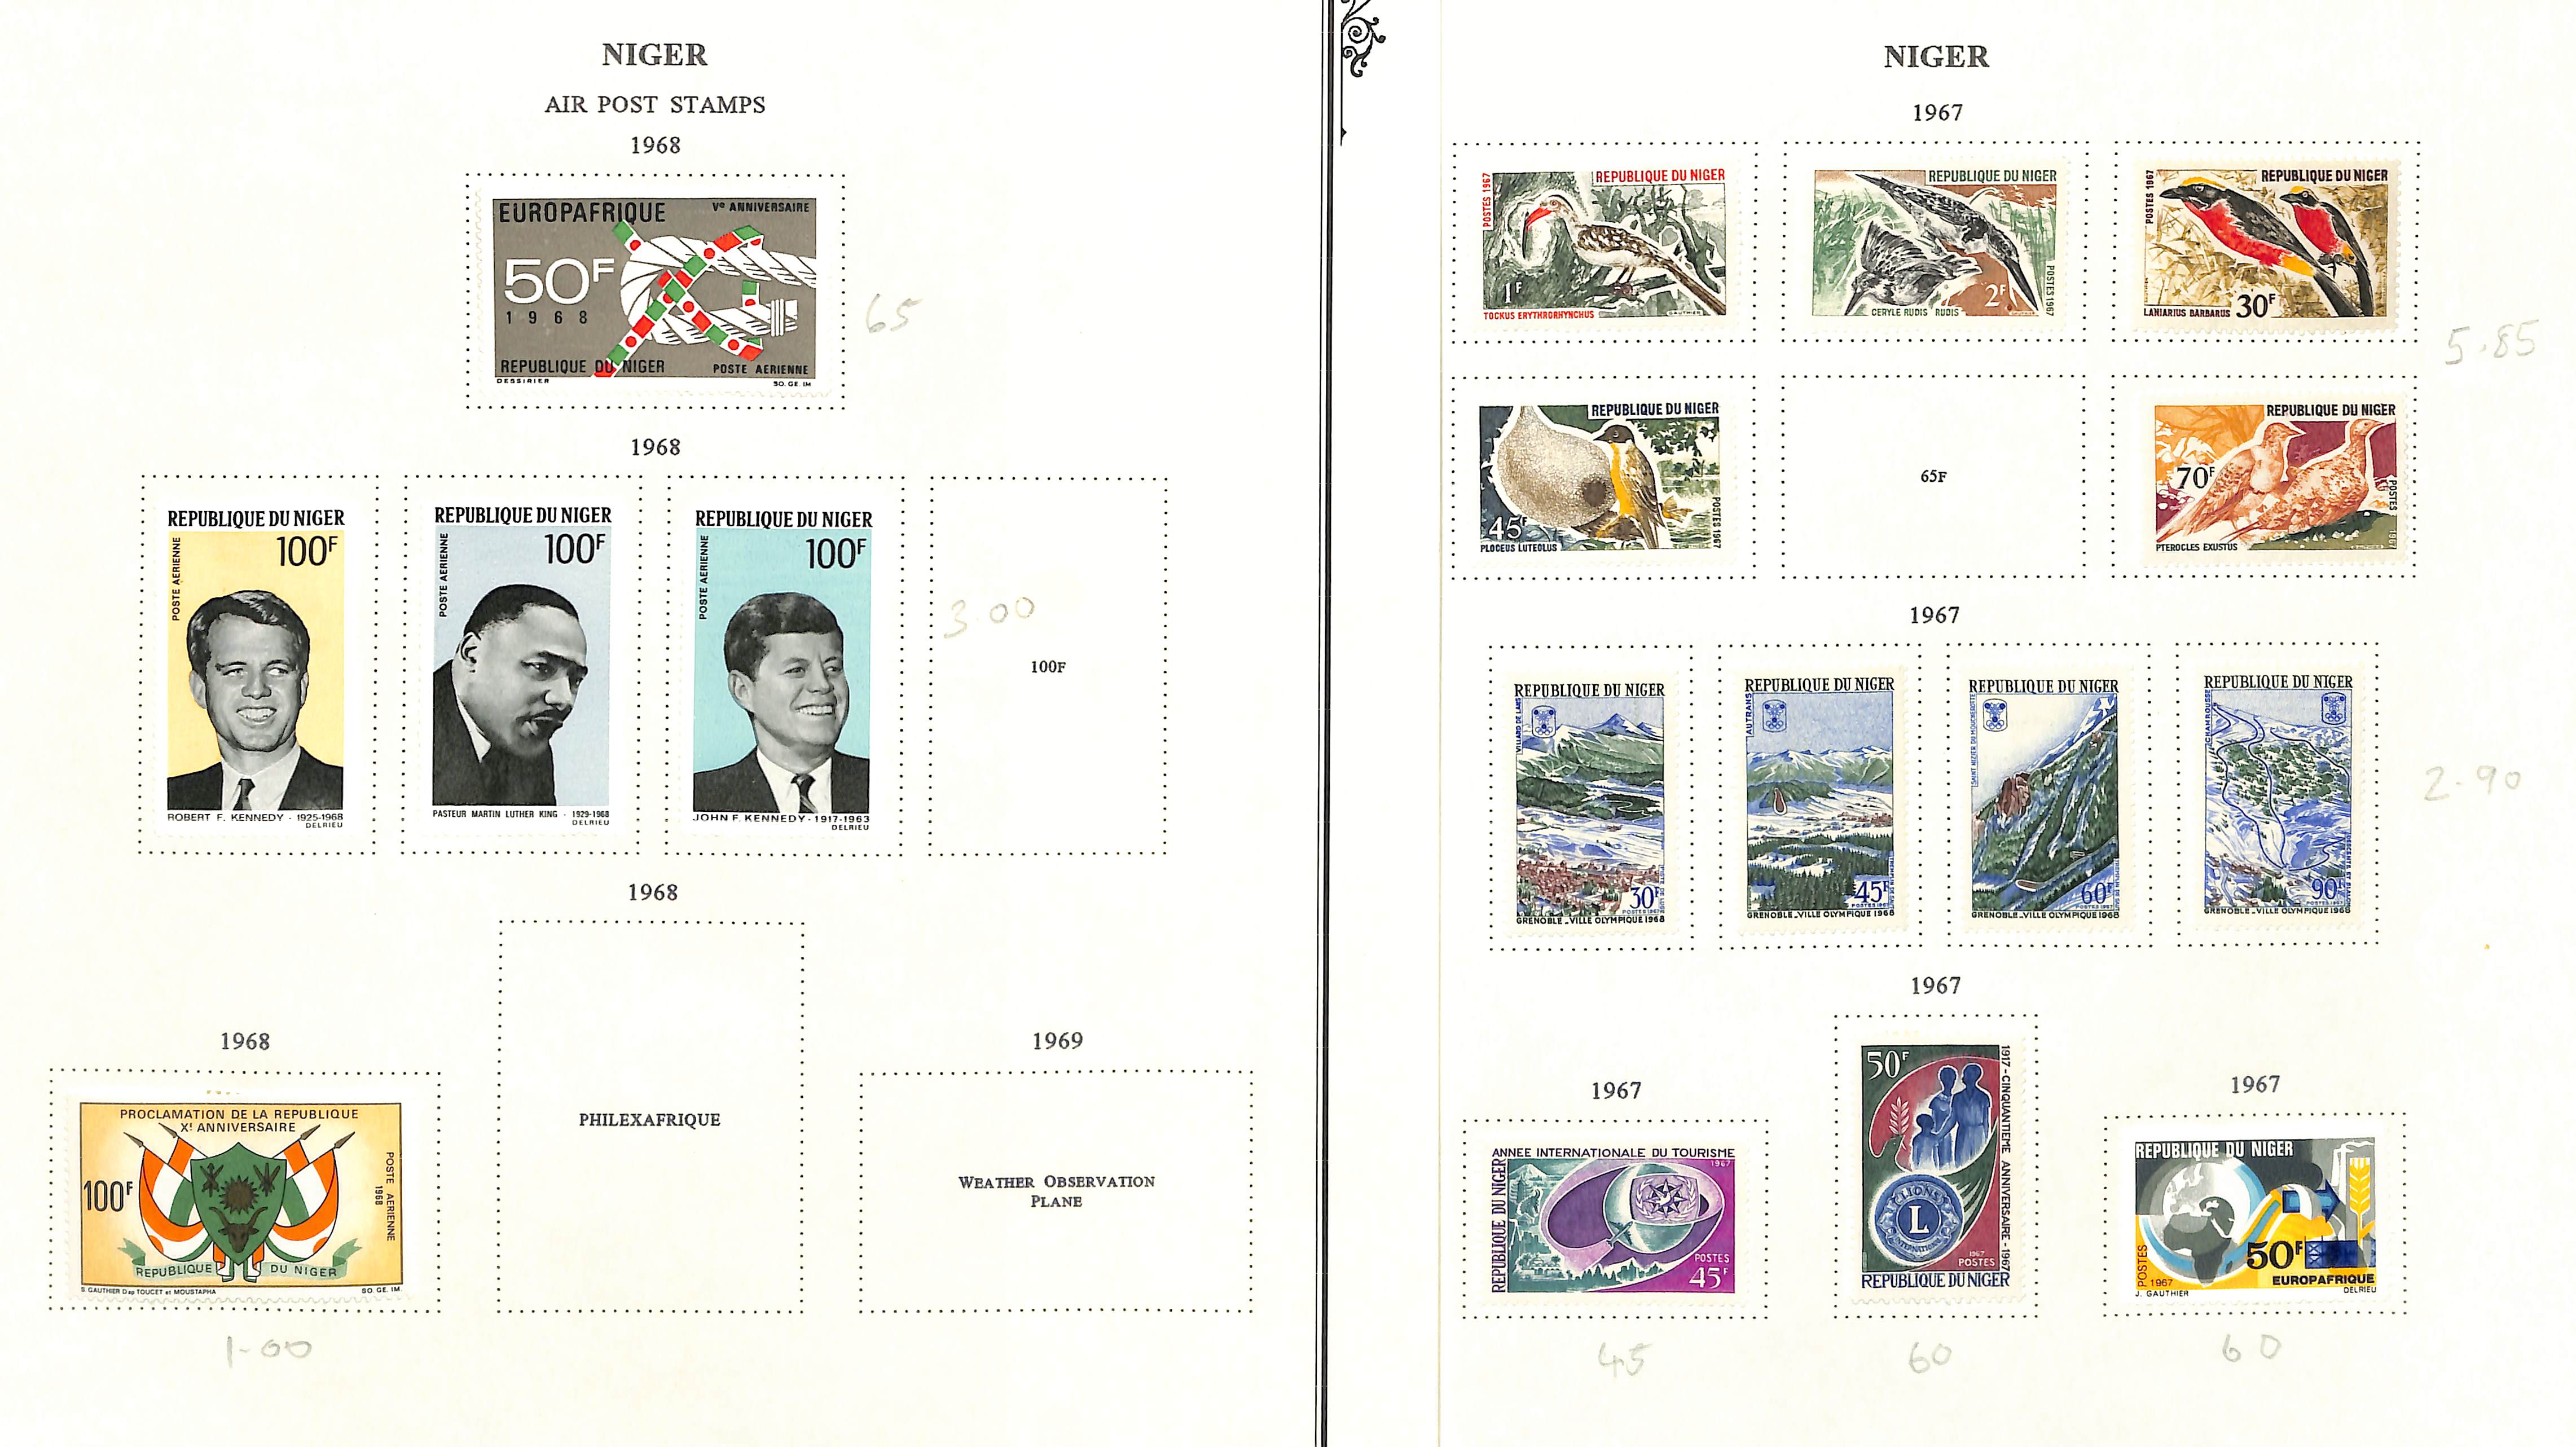 Niger. 1921 - c.1990 Mint and used collection with covers, die and plate proofs. (100s). - Image 12 of 26